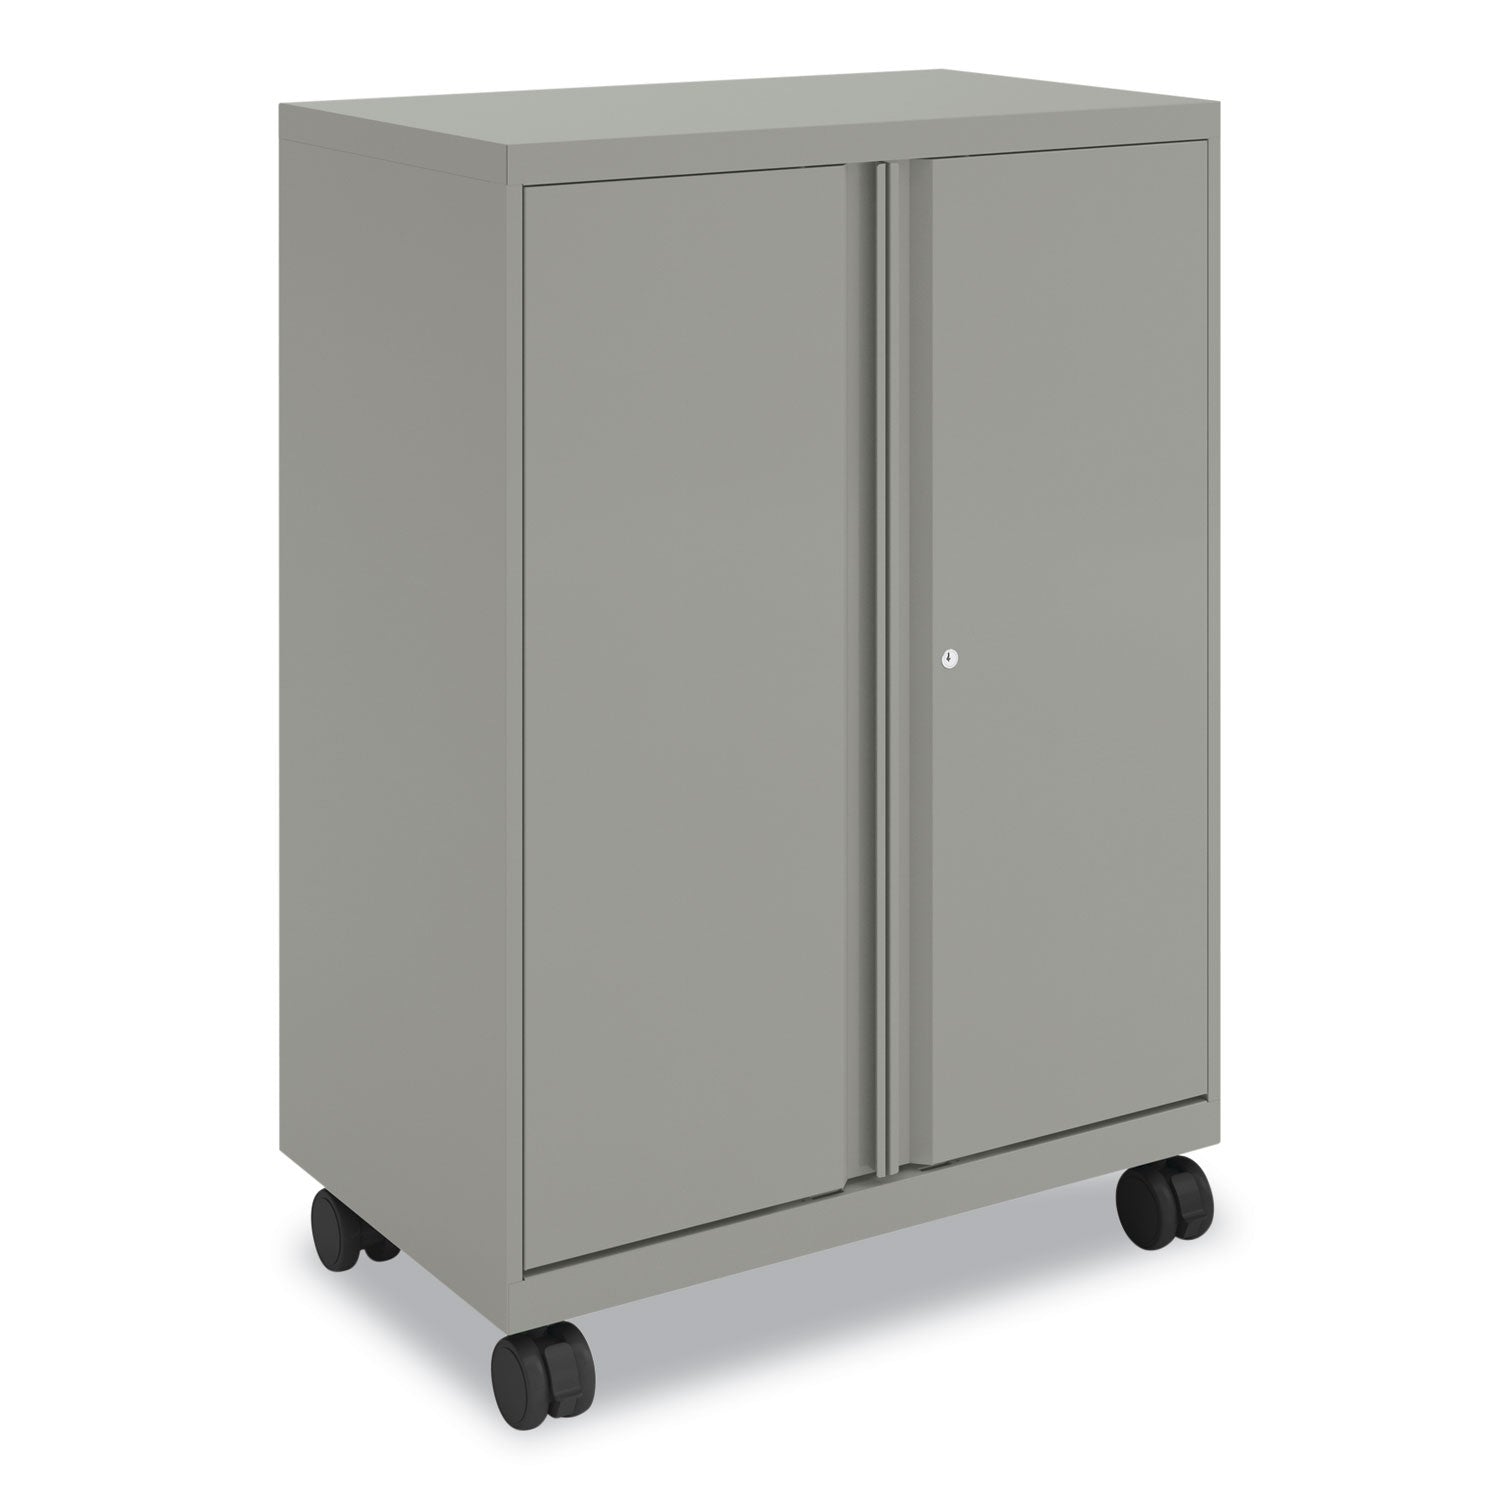 smartlink-mobile-cabinet-10-compartments-30w-x-18d-x-4232h-platinum-metallic-ships-in-7-10-business-days_honsc4330rlt1 - 1